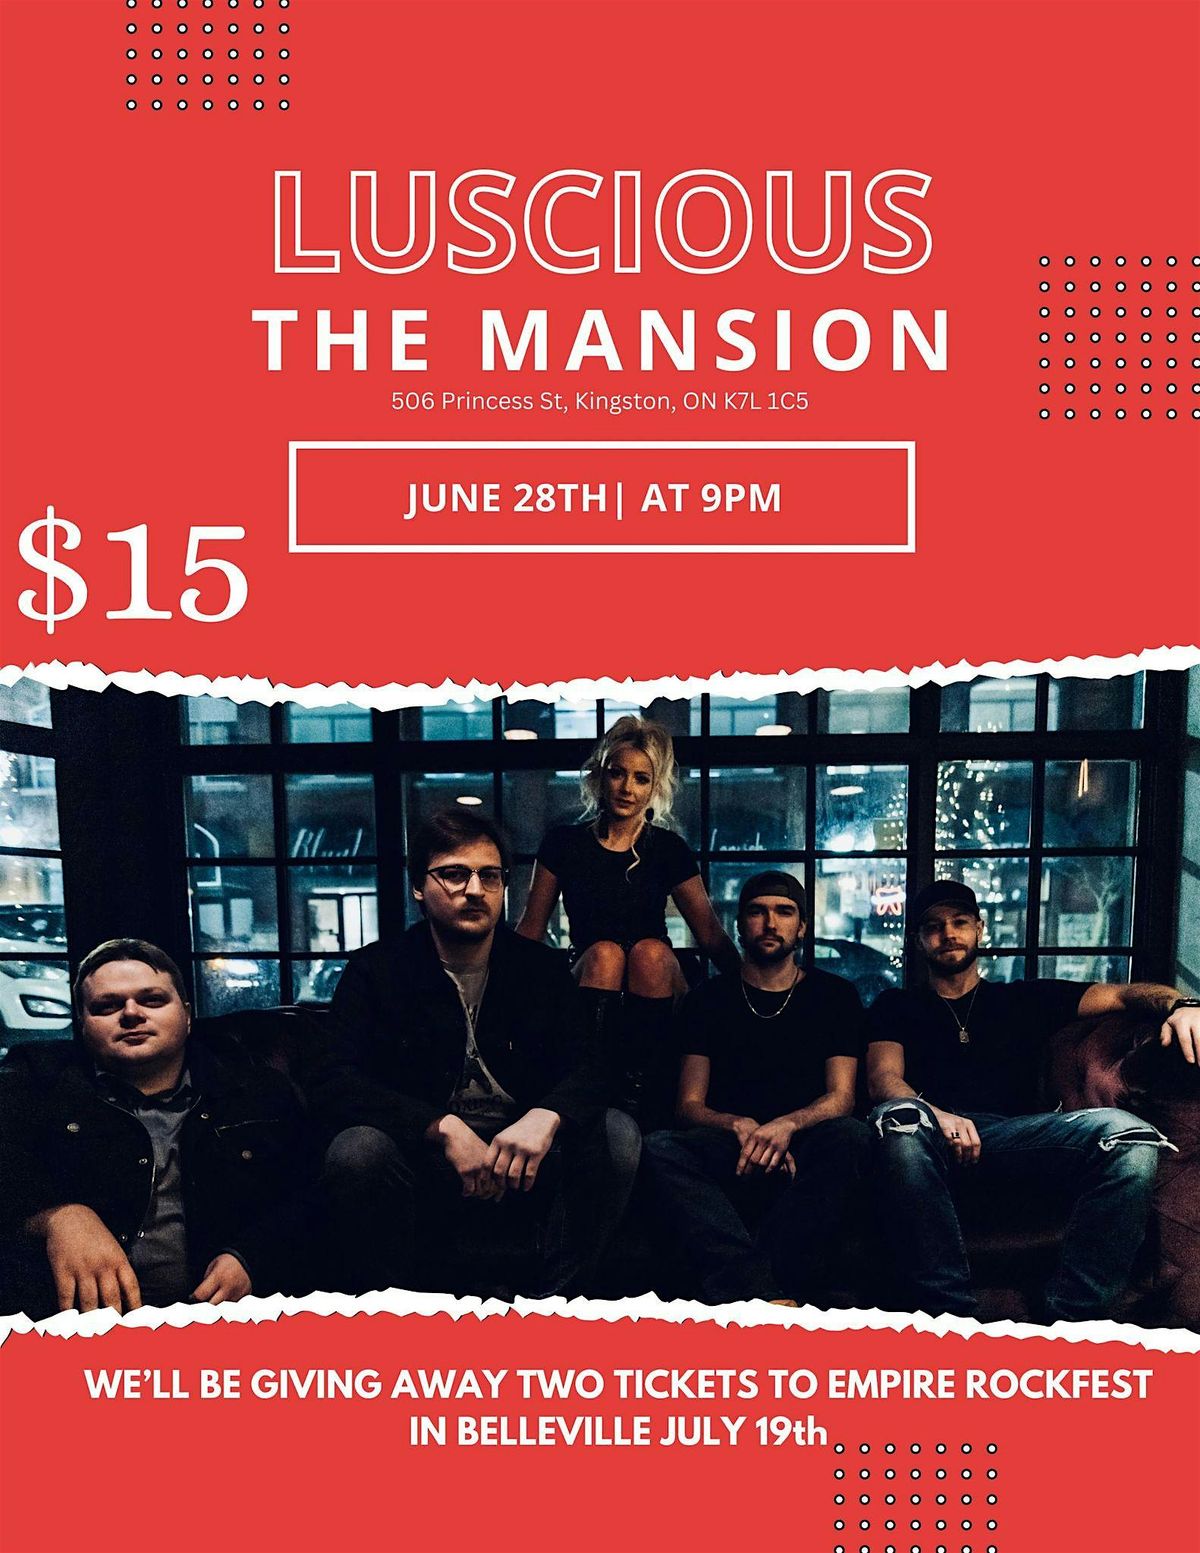 Luscious Live at The Mansion June 28th